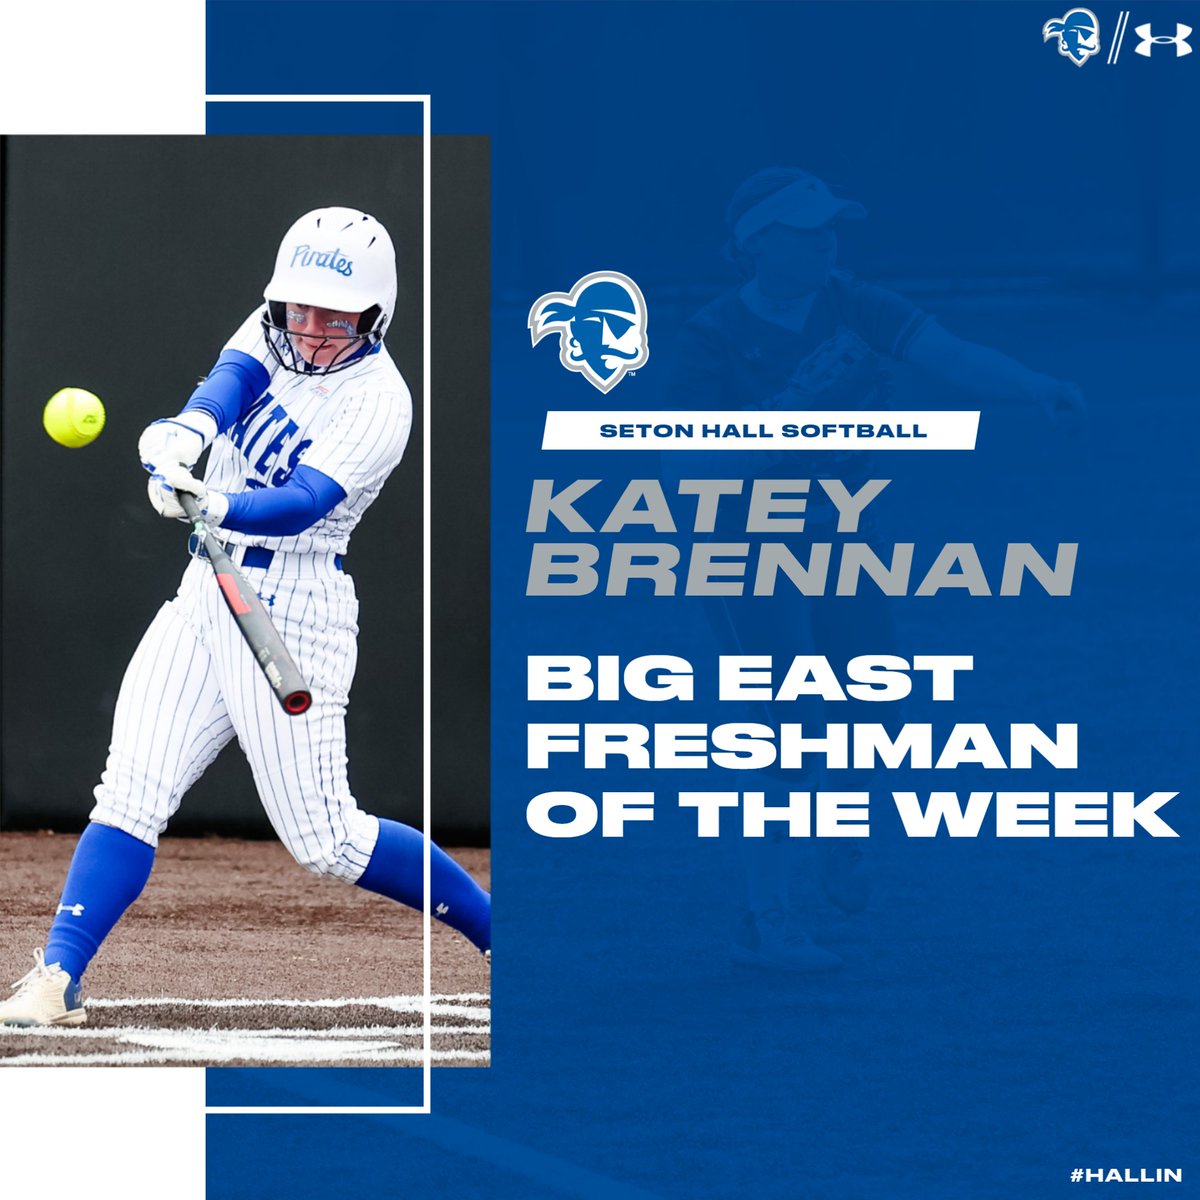 𝐊𝐁 𝐱 𝟐! For the second time this season, Katey Brennan is the BIG EAST Freshman of the Week! #HALLin🔵⚪ | #HooksUp